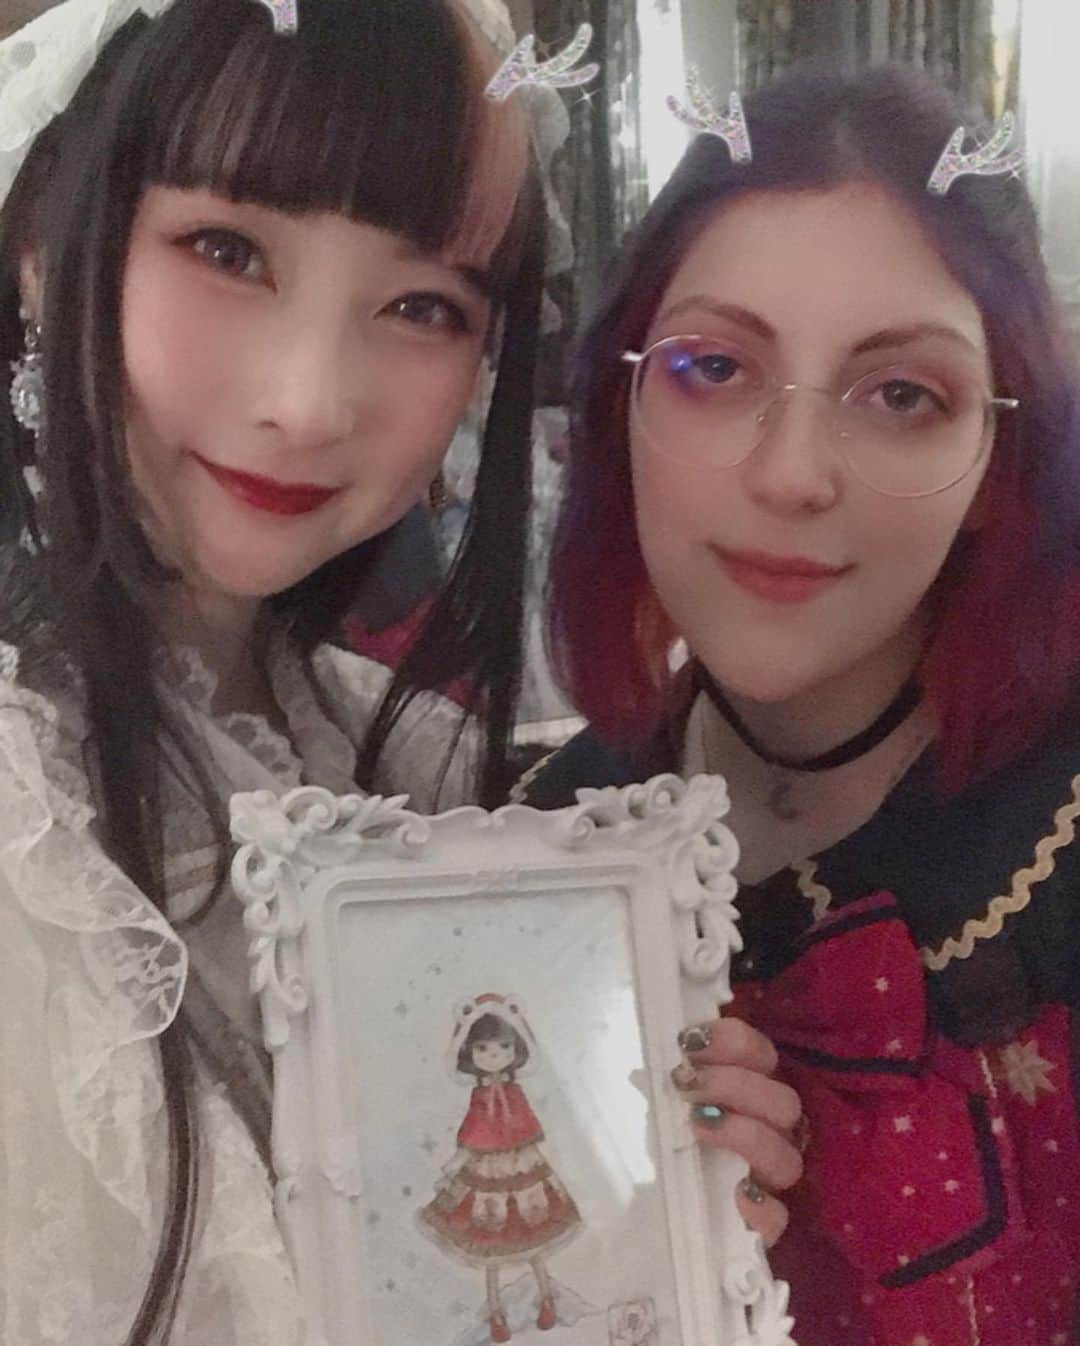 RinRinさんのインスタグラム写真 - (RinRinInstagram)「Throwback to Fancy Noël Party by Angelic Pretty Paris✨ the photos are suuuuperr grainy cause it was very dark🙇🏻‍♀️ We had a lovely French course dinner ③ followed by a secret Santa gift exchange~🎁 I received this pretty white picture frame ⑥ 💕 @evangelyn._ drew this very beautifully delicate drawing btw ⑦⑧😩❤️ . . I liked how different and casual this party was cause I was able to catch up with some friends and get to know some new friends💕 it was also so good to see everyone enjoying themselves 💕 . The restaurant was nice enough to let us overstay the reservation time and I think I hung out until around 10pm (?) when I left there were still some people left just hanging out and chatting away✨ . Also how cute is the last video ⑨ 😬 . Thank you @angelicpretty_official @angelicprettyparis  for inviting me to see everyone in Paris ✨ . . 去年12月プリティーパリ店のFancy Noelクリスマスパーティーでした〜♪ 暗かったからちょっと写真の質が悪い🙇🏻‍♀️ ディナーは豪華なフランス料理のコースでした③✨そしてシークレットサンタもやって、この綺麗なフレームをいただきましたー⑥💕@evangelyn._ もこのかわいい絵を描いたよ！⑦⑧ . いつもと違う感じのディナーパーティーがすごい気にってる〜みんなと直接合流できた♪ 久しぶりに会う子たちと話できて、新しい友達も作れました✨本当にみんなが楽しんでる顔を見れて幸せ〜☺️ . ここのレストランもめっちゃ優しかったよ、予約時間過ぎても、閉店までいられてくれた♪ 私もゆっくりしてて、22時ごろ出たけど、まだまだ遊んでる子を残っててみんな楽しんでた✨ . 最後の動画可愛くない⑨？😬 . @angelicpretty_official @angelicprettyparis 誘ってくれて本当にありがとうございました✨ . . 👉🏻 #rinrinlolita #rinrininparis . #rinrindoll #angelicpretty #angelicprettyparis #fancynoel #fancynoelparty #paris #lolita #lolitafashion #lolitateaparty #angelicprettyteaparty #ロリータ #ロリータコーデ #パリ #旅行 #ロリィタ #ootd #lolitacoord #maceoparis #コーデ #お茶会 #クリスマスパーティー」4月8日 18時55分 - rinrindoll